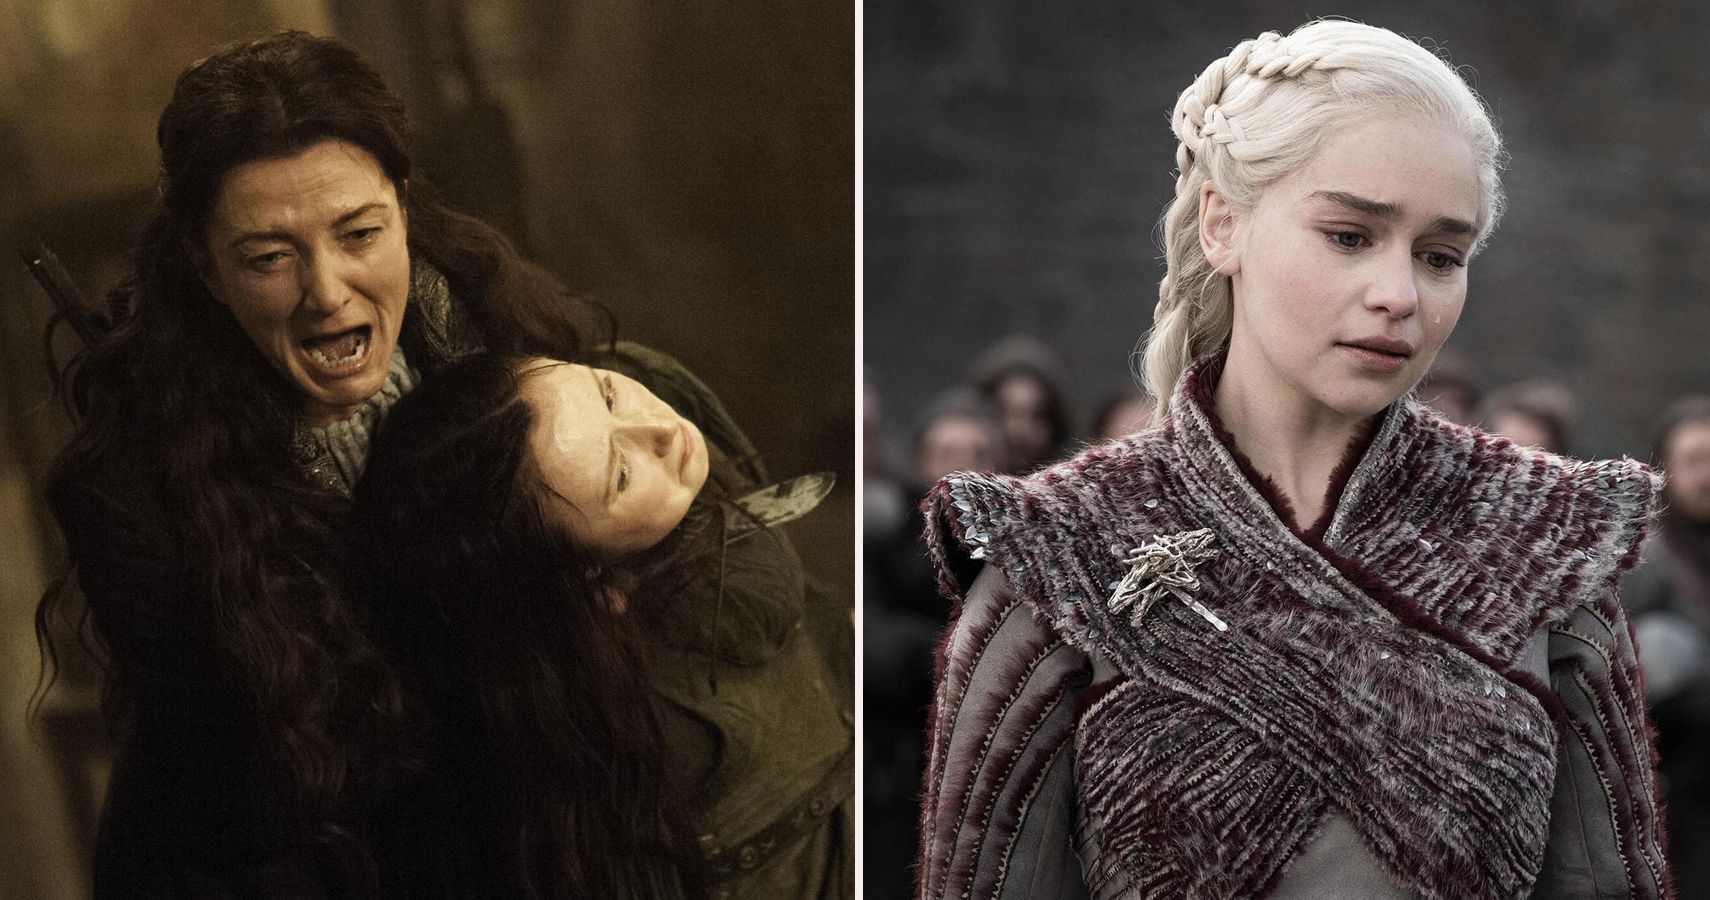 5 Best And Worst Episodes Of Game Of Thrones According To Imdb